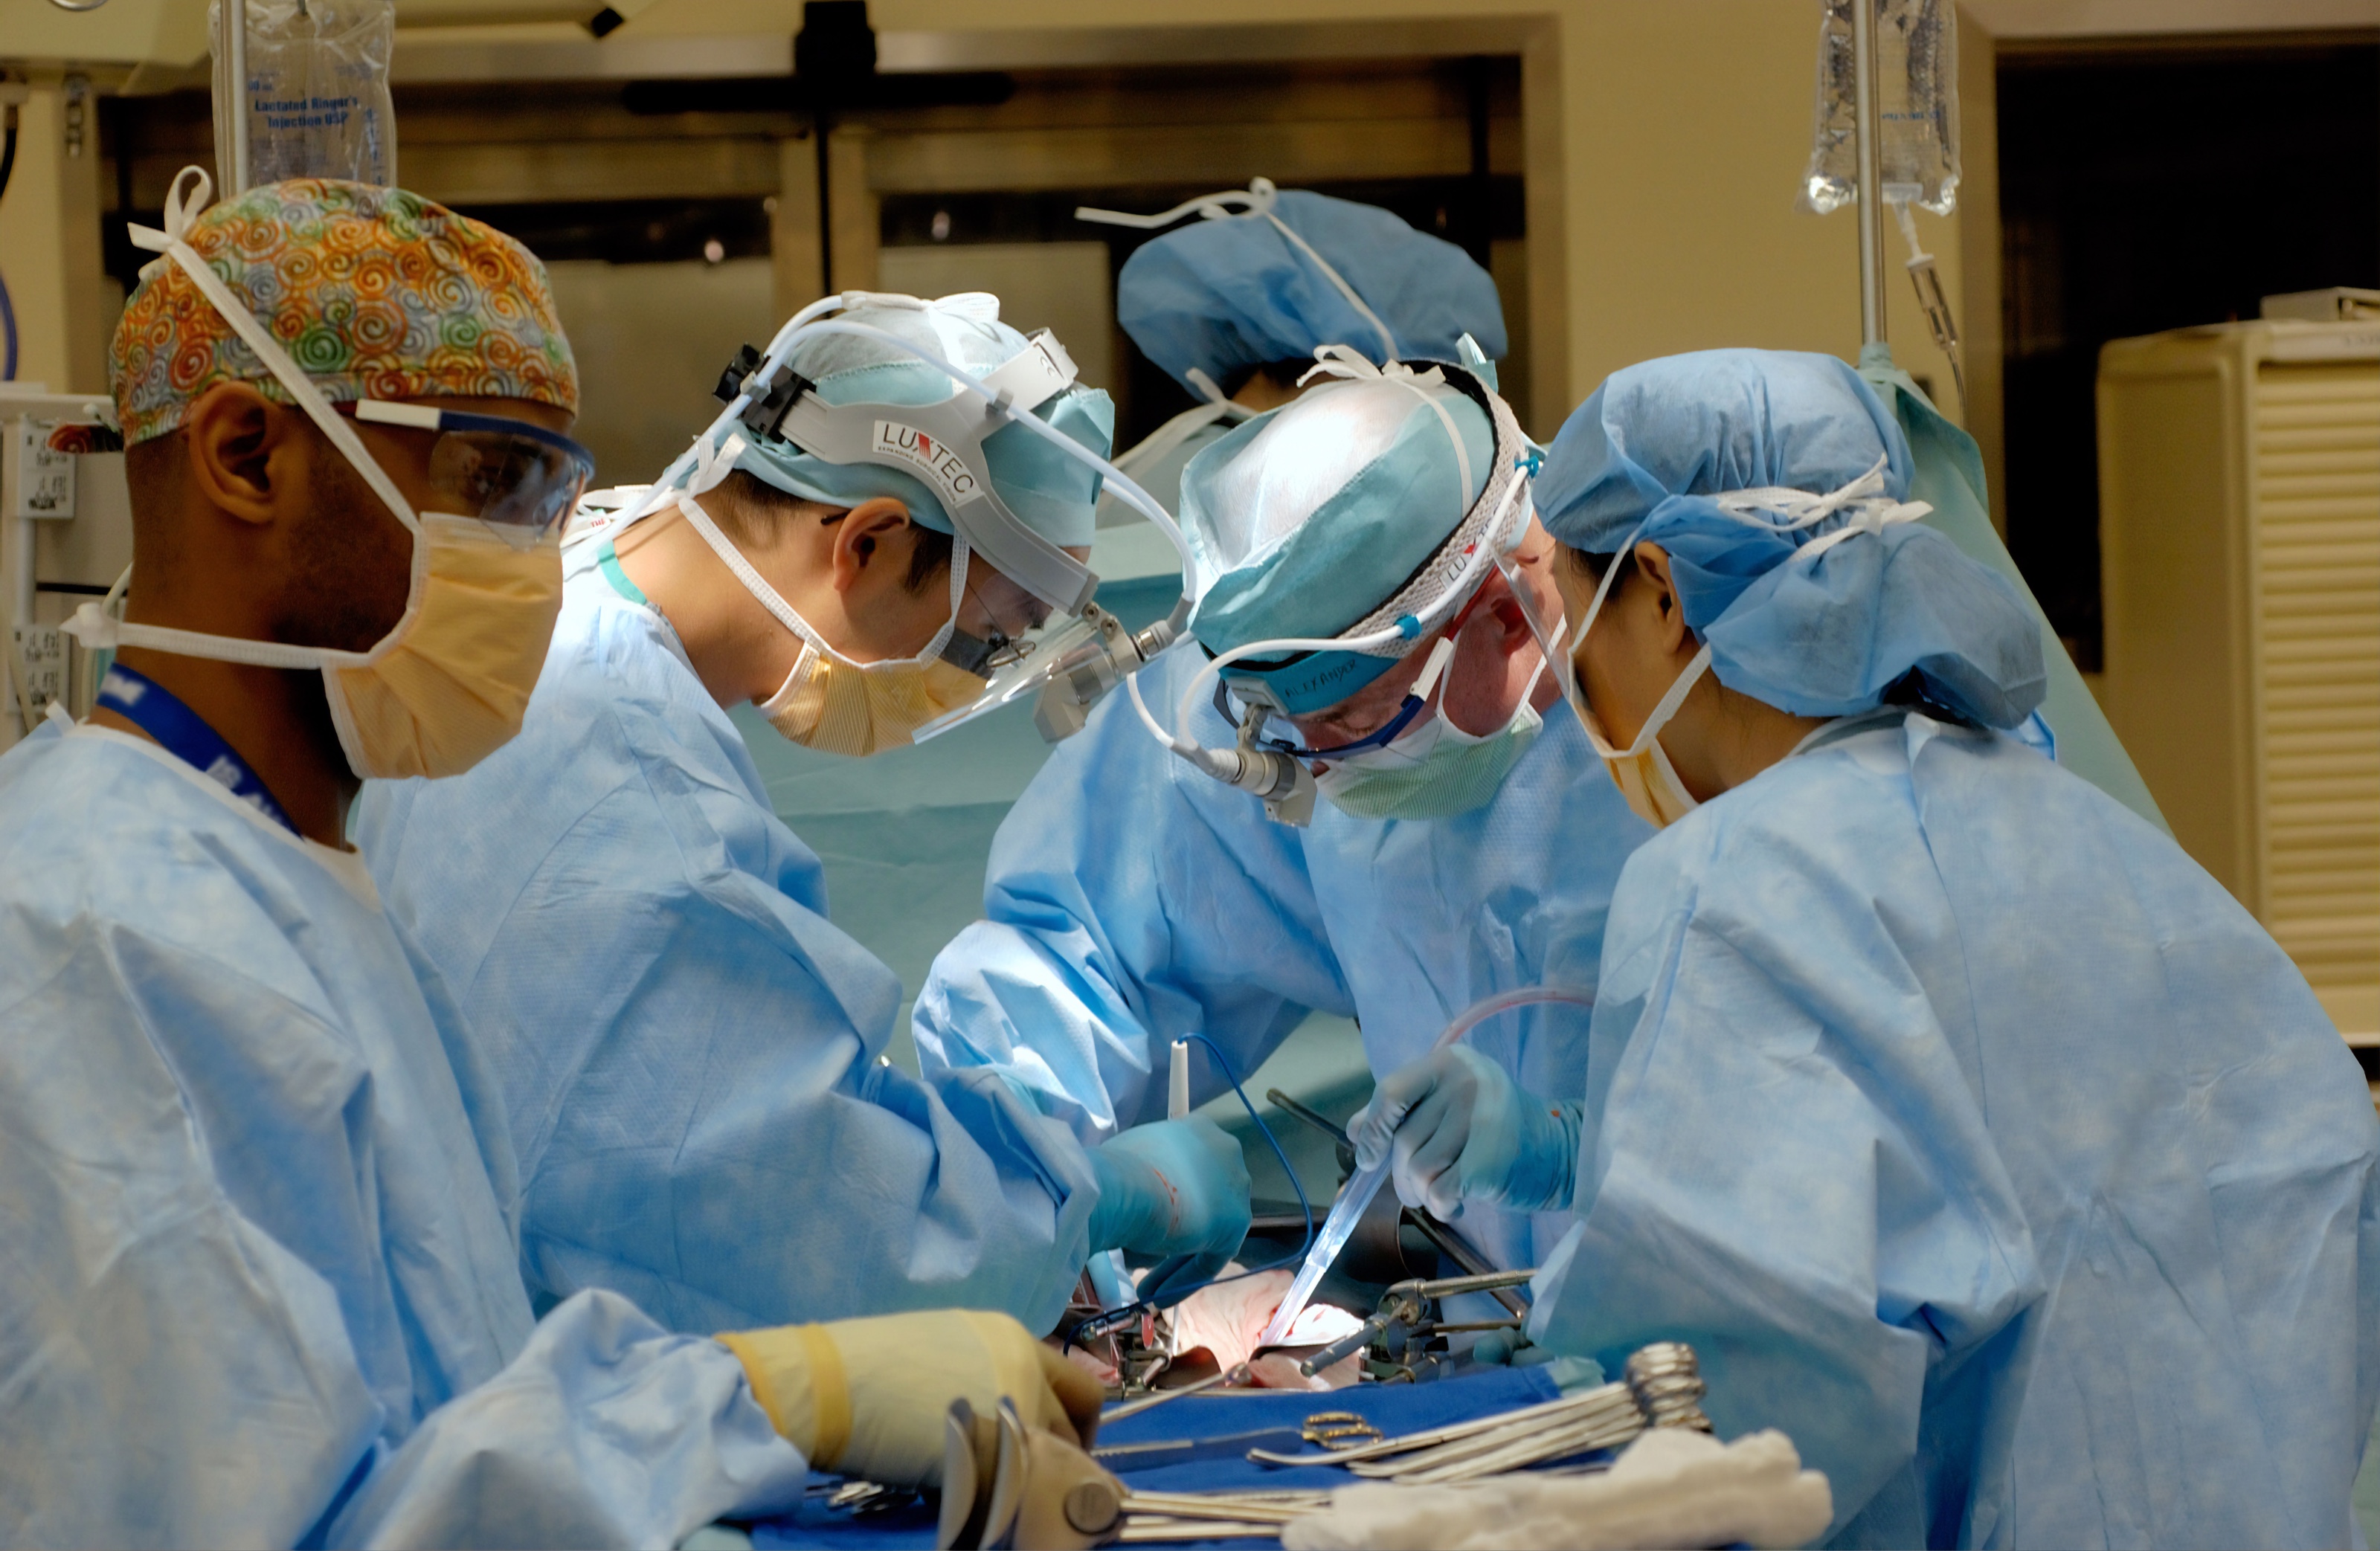 Surgeons operating on a patient.